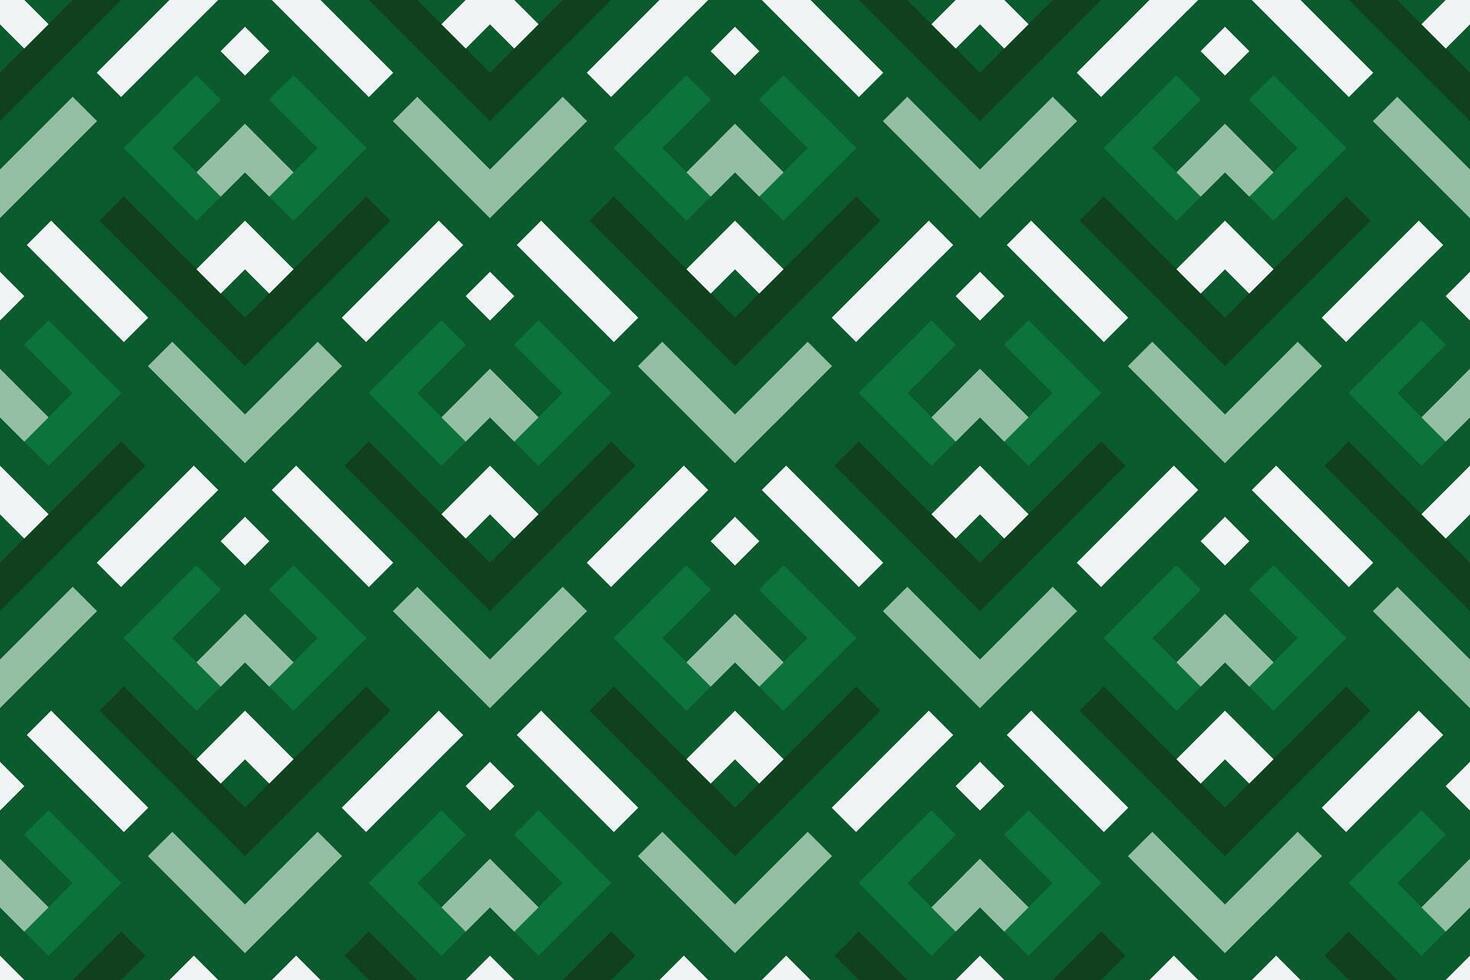 Abstract geometric pattern with lines, simple seamless vector background. green and white texture